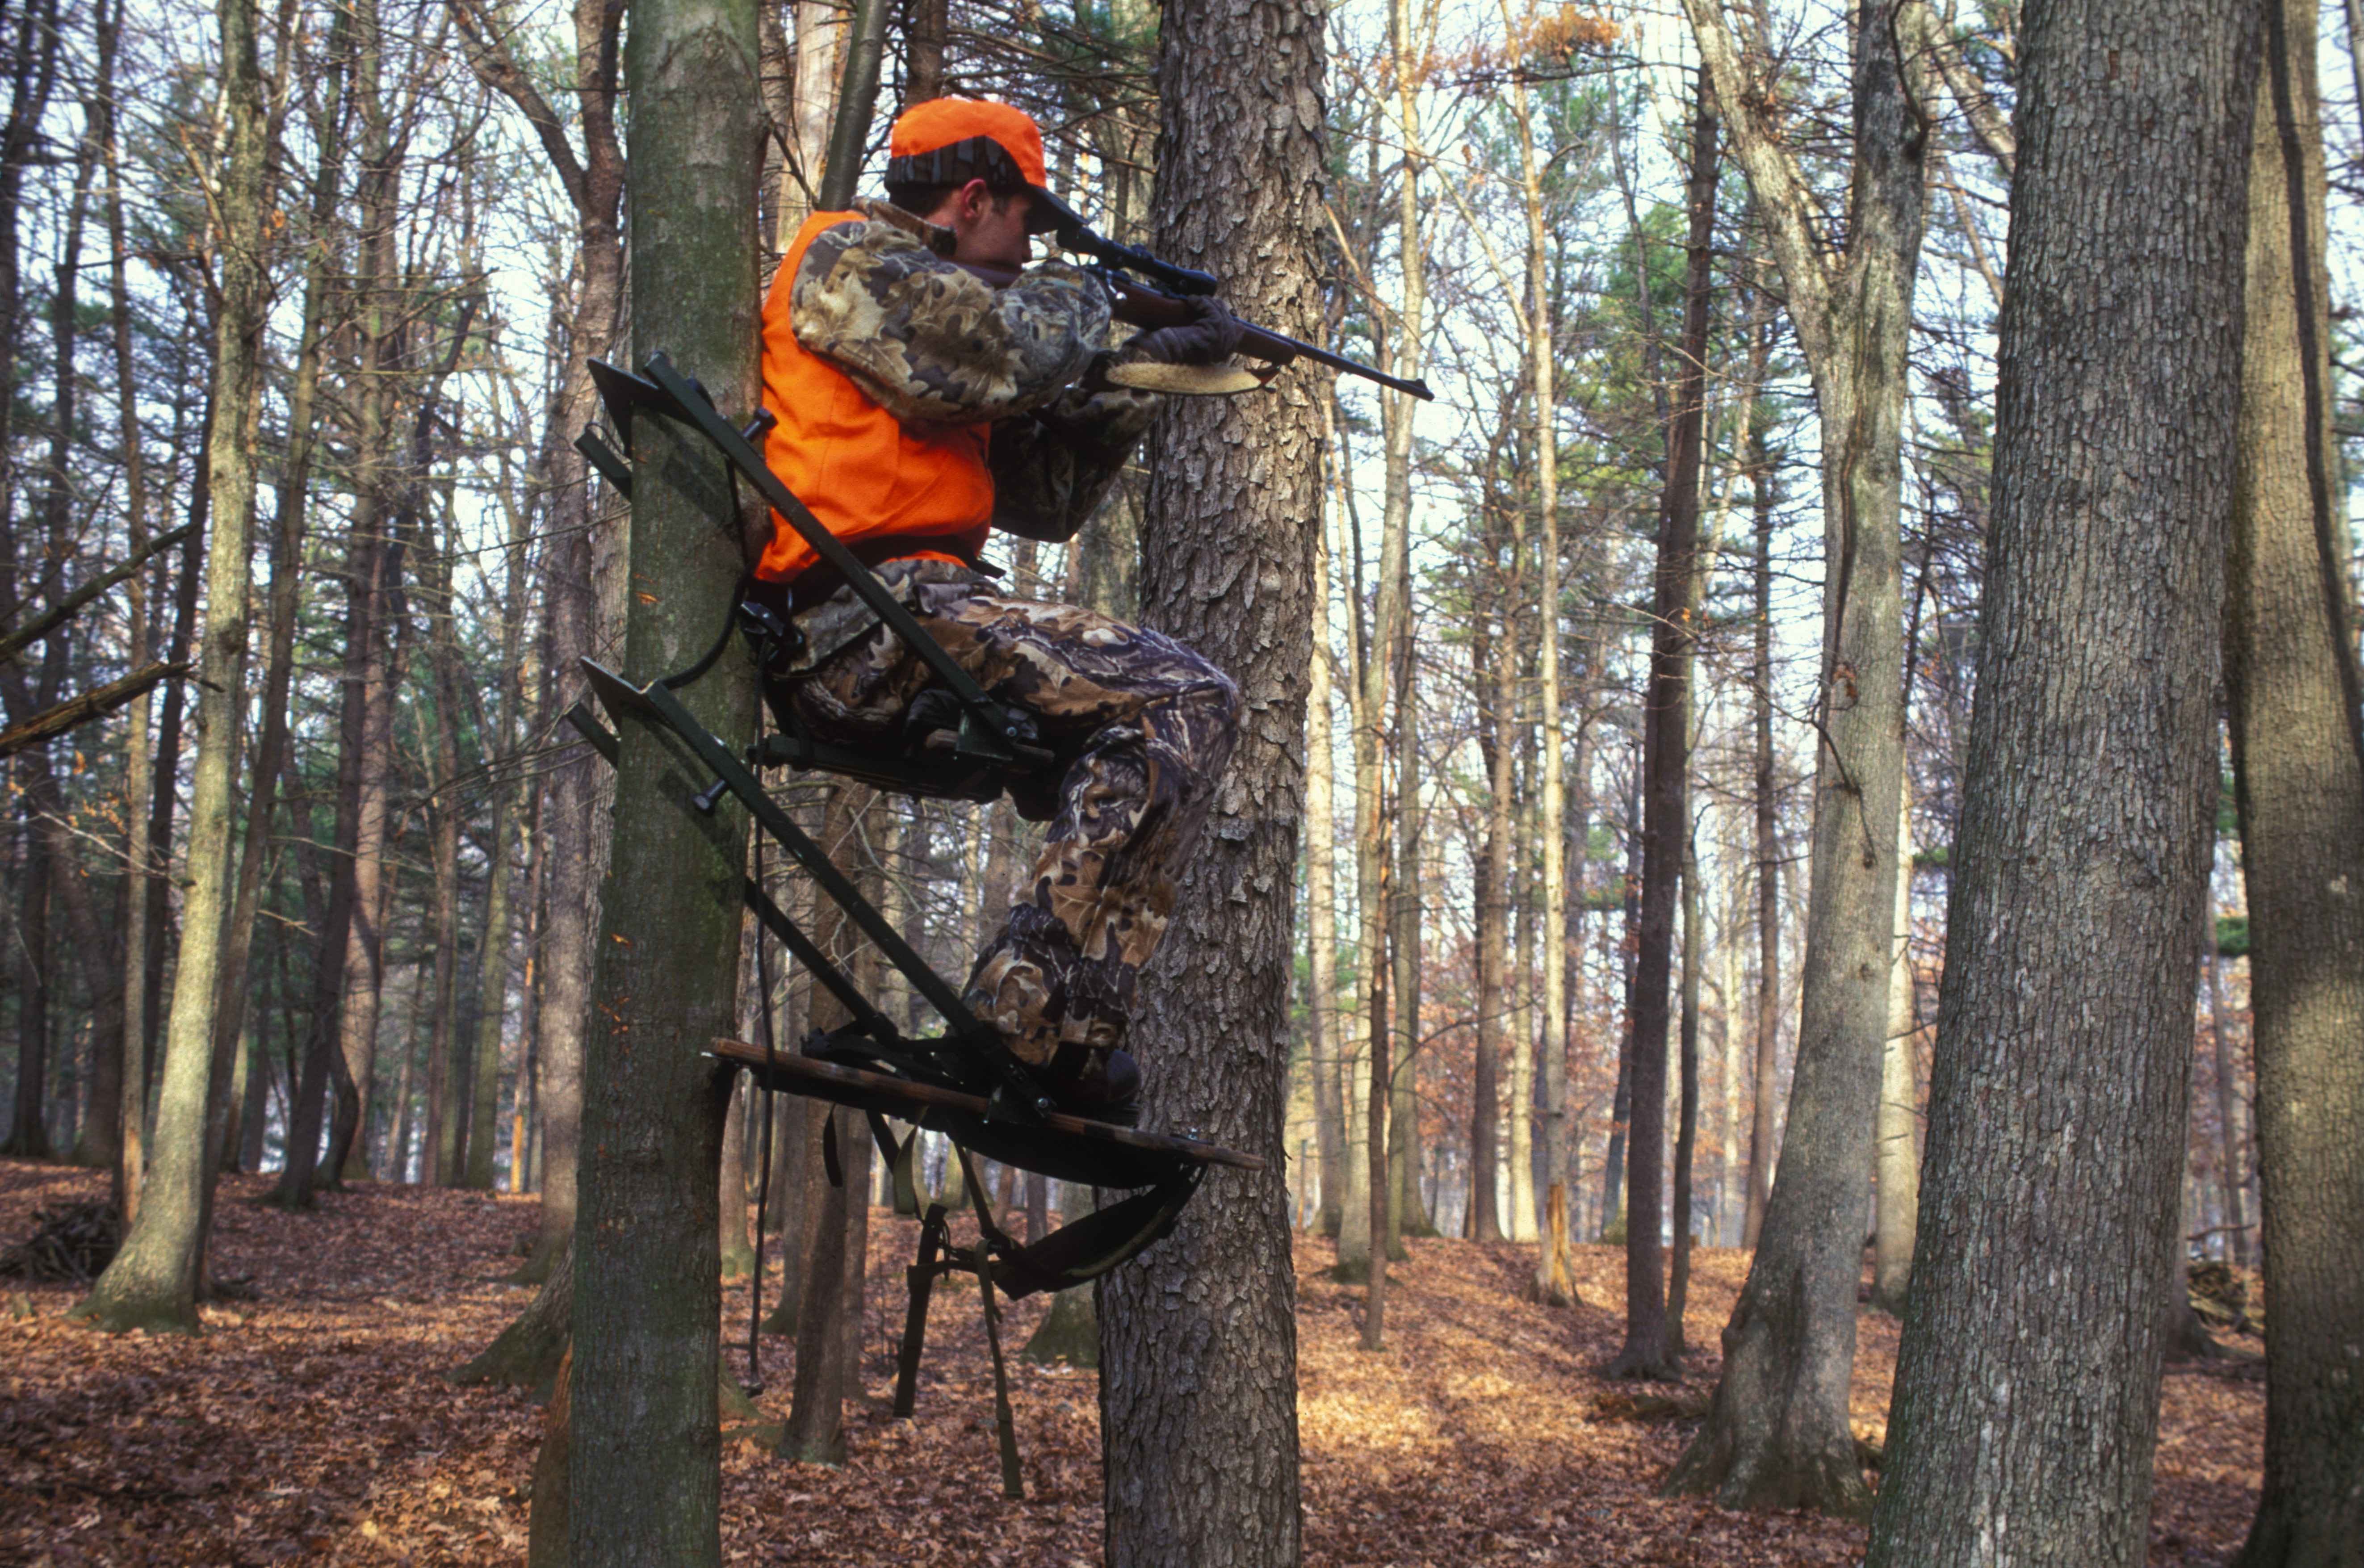 A hunter sitting in a tree stand, wearing camo and blaze orange.